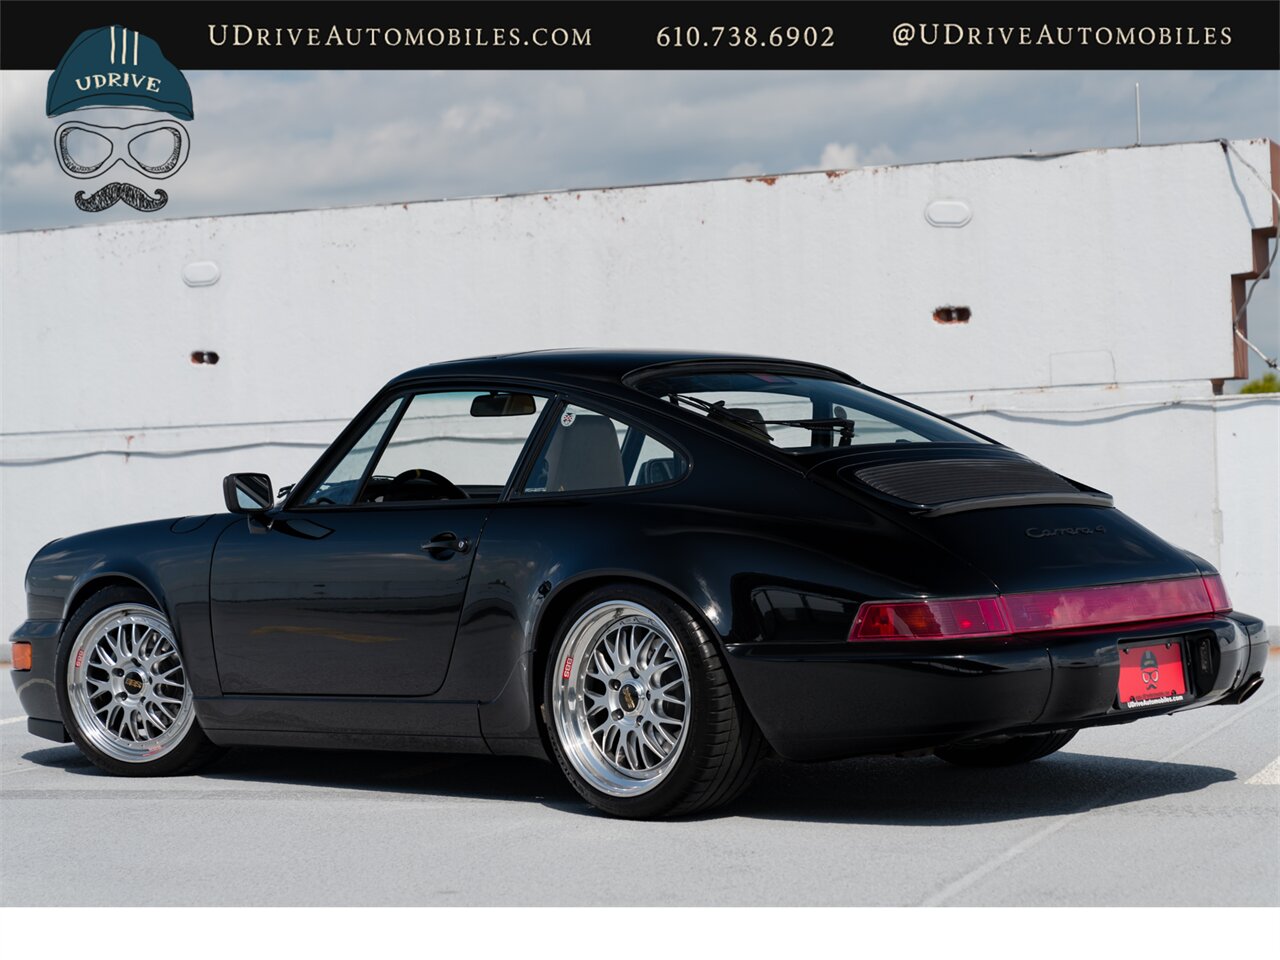 1989 Porsche 911 Carrera 4  964 C4 5 Speed Manual $63k Recent Service and Upgrades - Photo 4 - West Chester, PA 19382